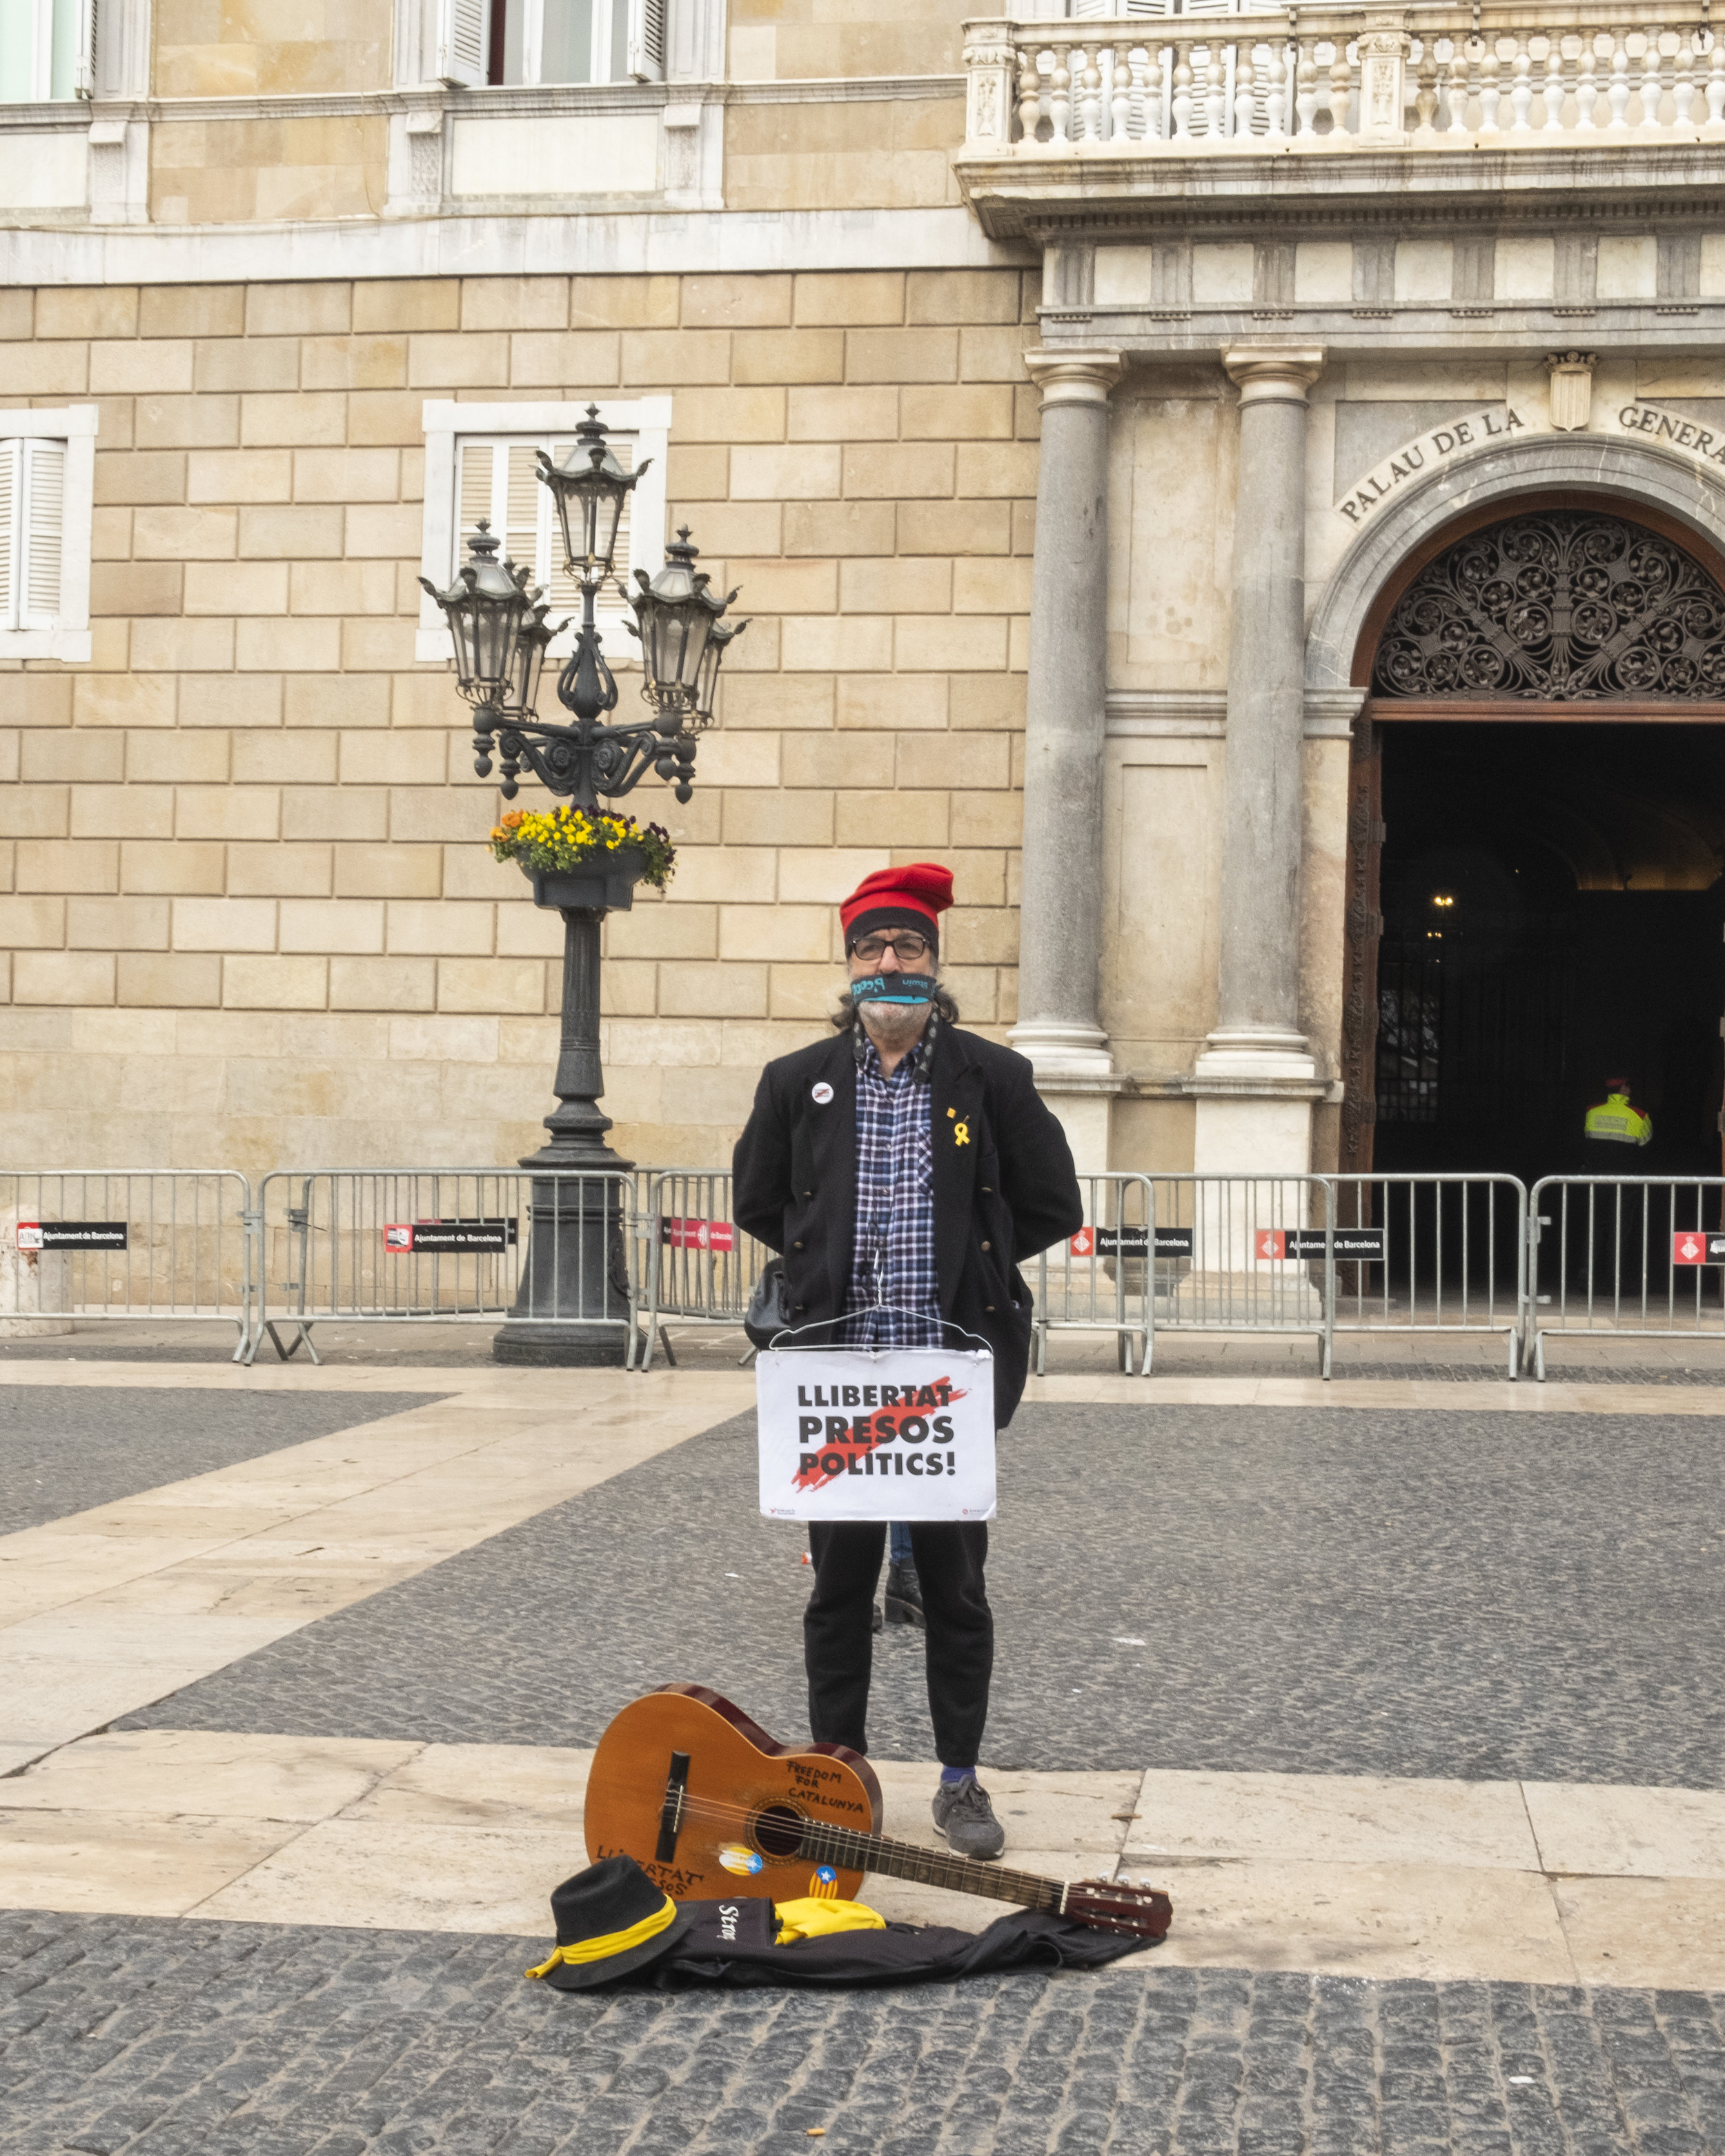  Catalan nationalists protest for independence from Spain. This man stands in a populated city square, silently demanding freedom as indicated by his yellow ribbon and sign which translates to “freedom of political prisoners. These high-ranking Catal